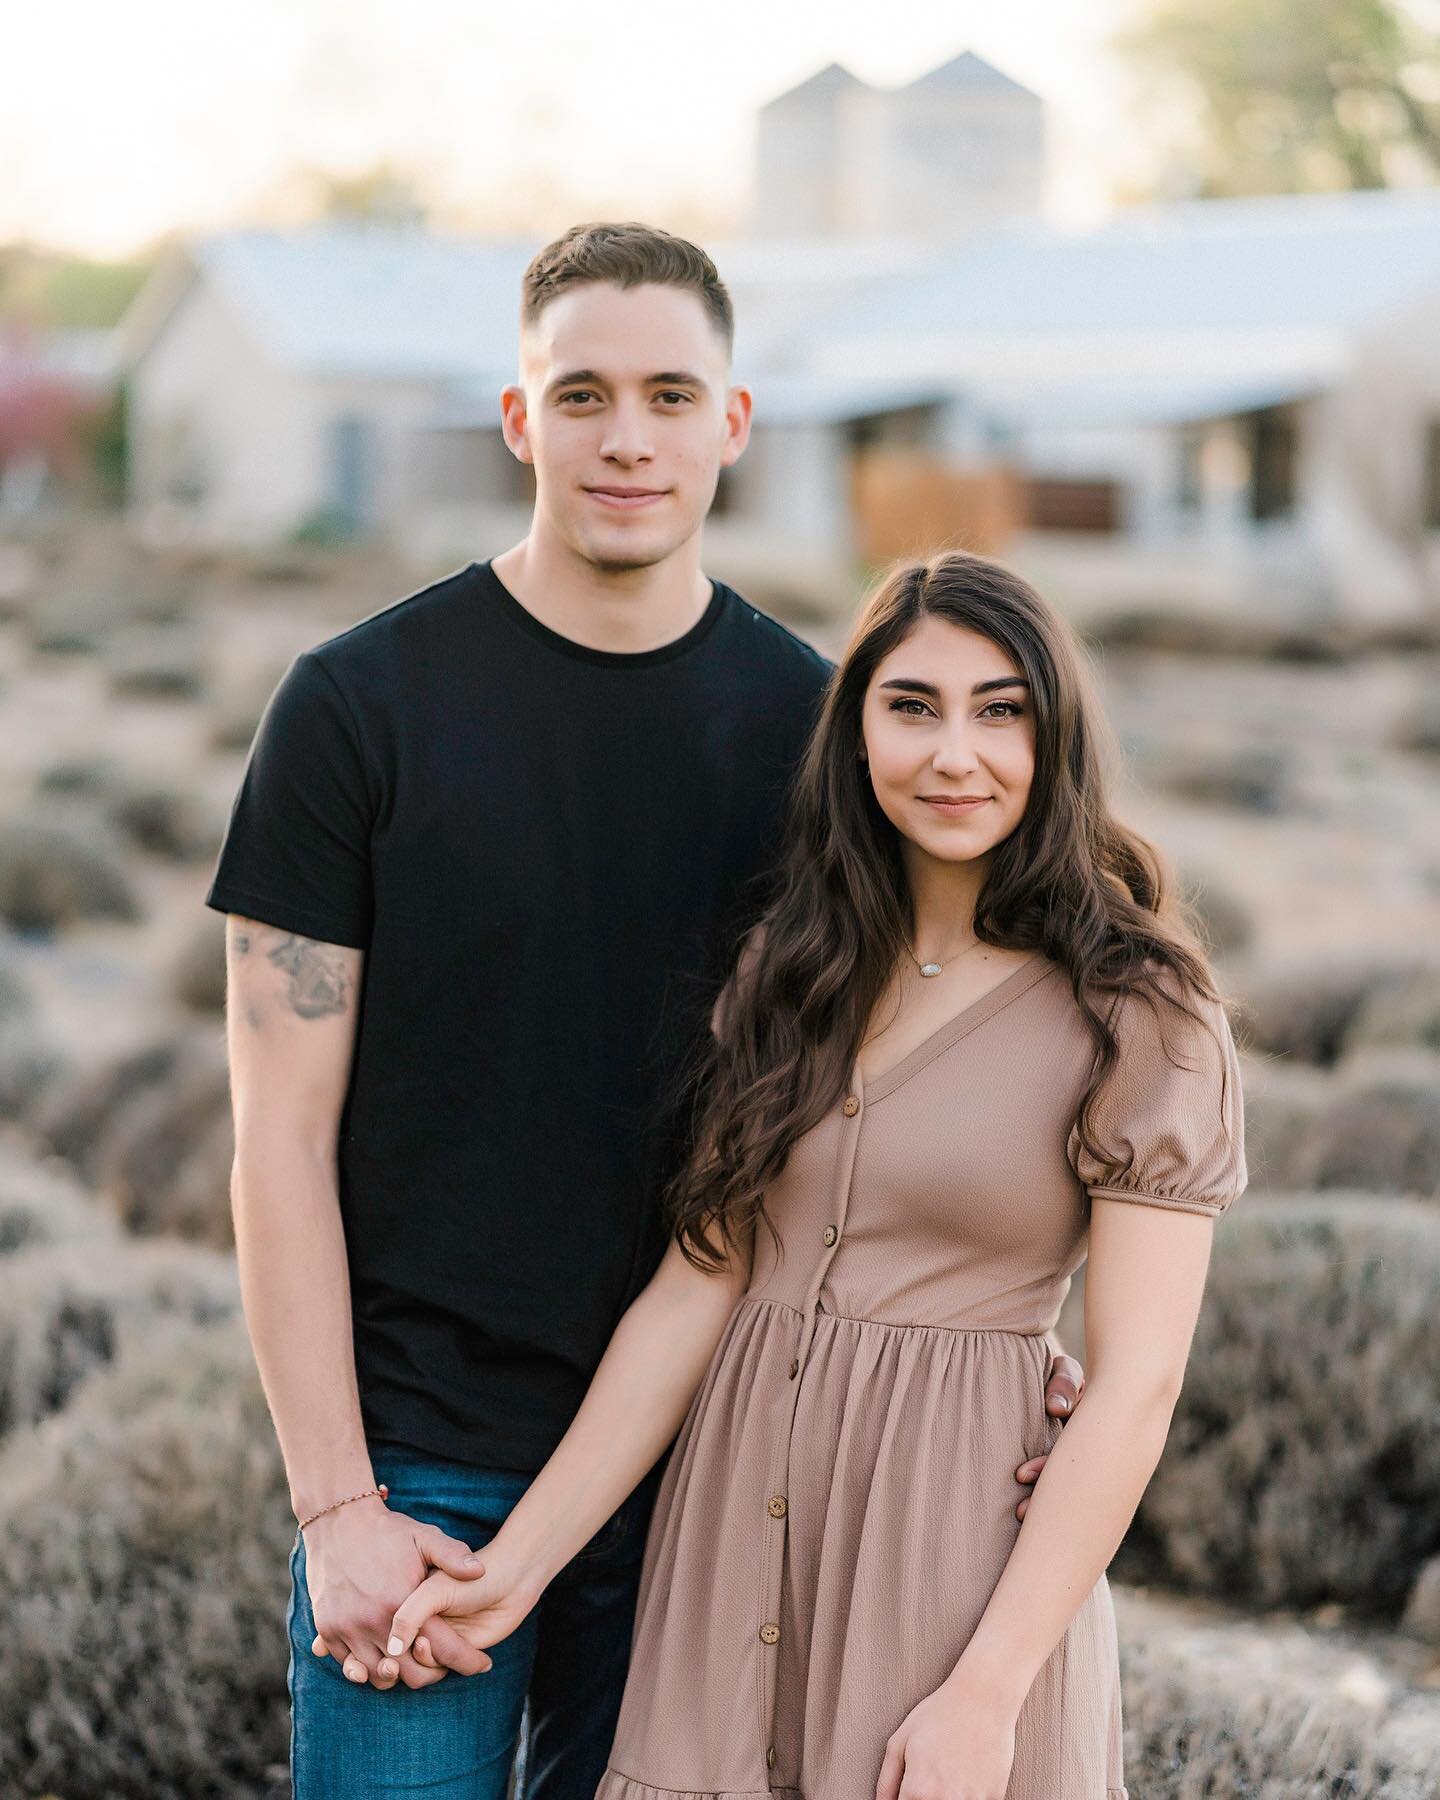 These honey pies are getting married TODAY!!! We could not be more pumped about it! 
.
.
.
#destinationphotographer #nmphotographer  #southwestisbest #southwestphotographer #portraitphotography  #lifestyle  #carissaandben #nmweddings #newmexico